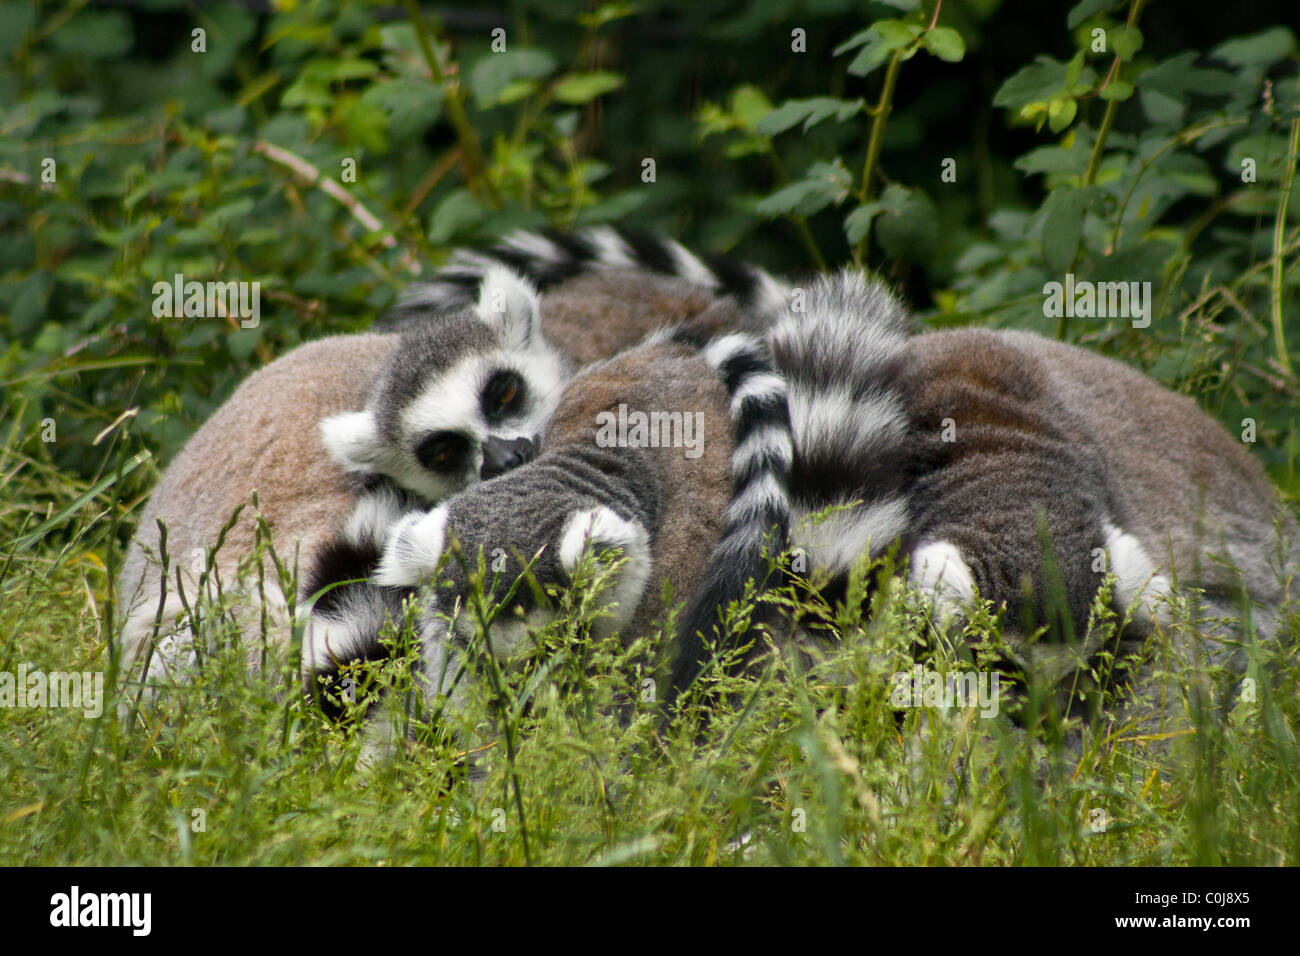 A group of Ring-tailed Lemurs (Lemur catta) sleeping in a huddle at the Copenhagen Zoo in Denmark. Stock Photo